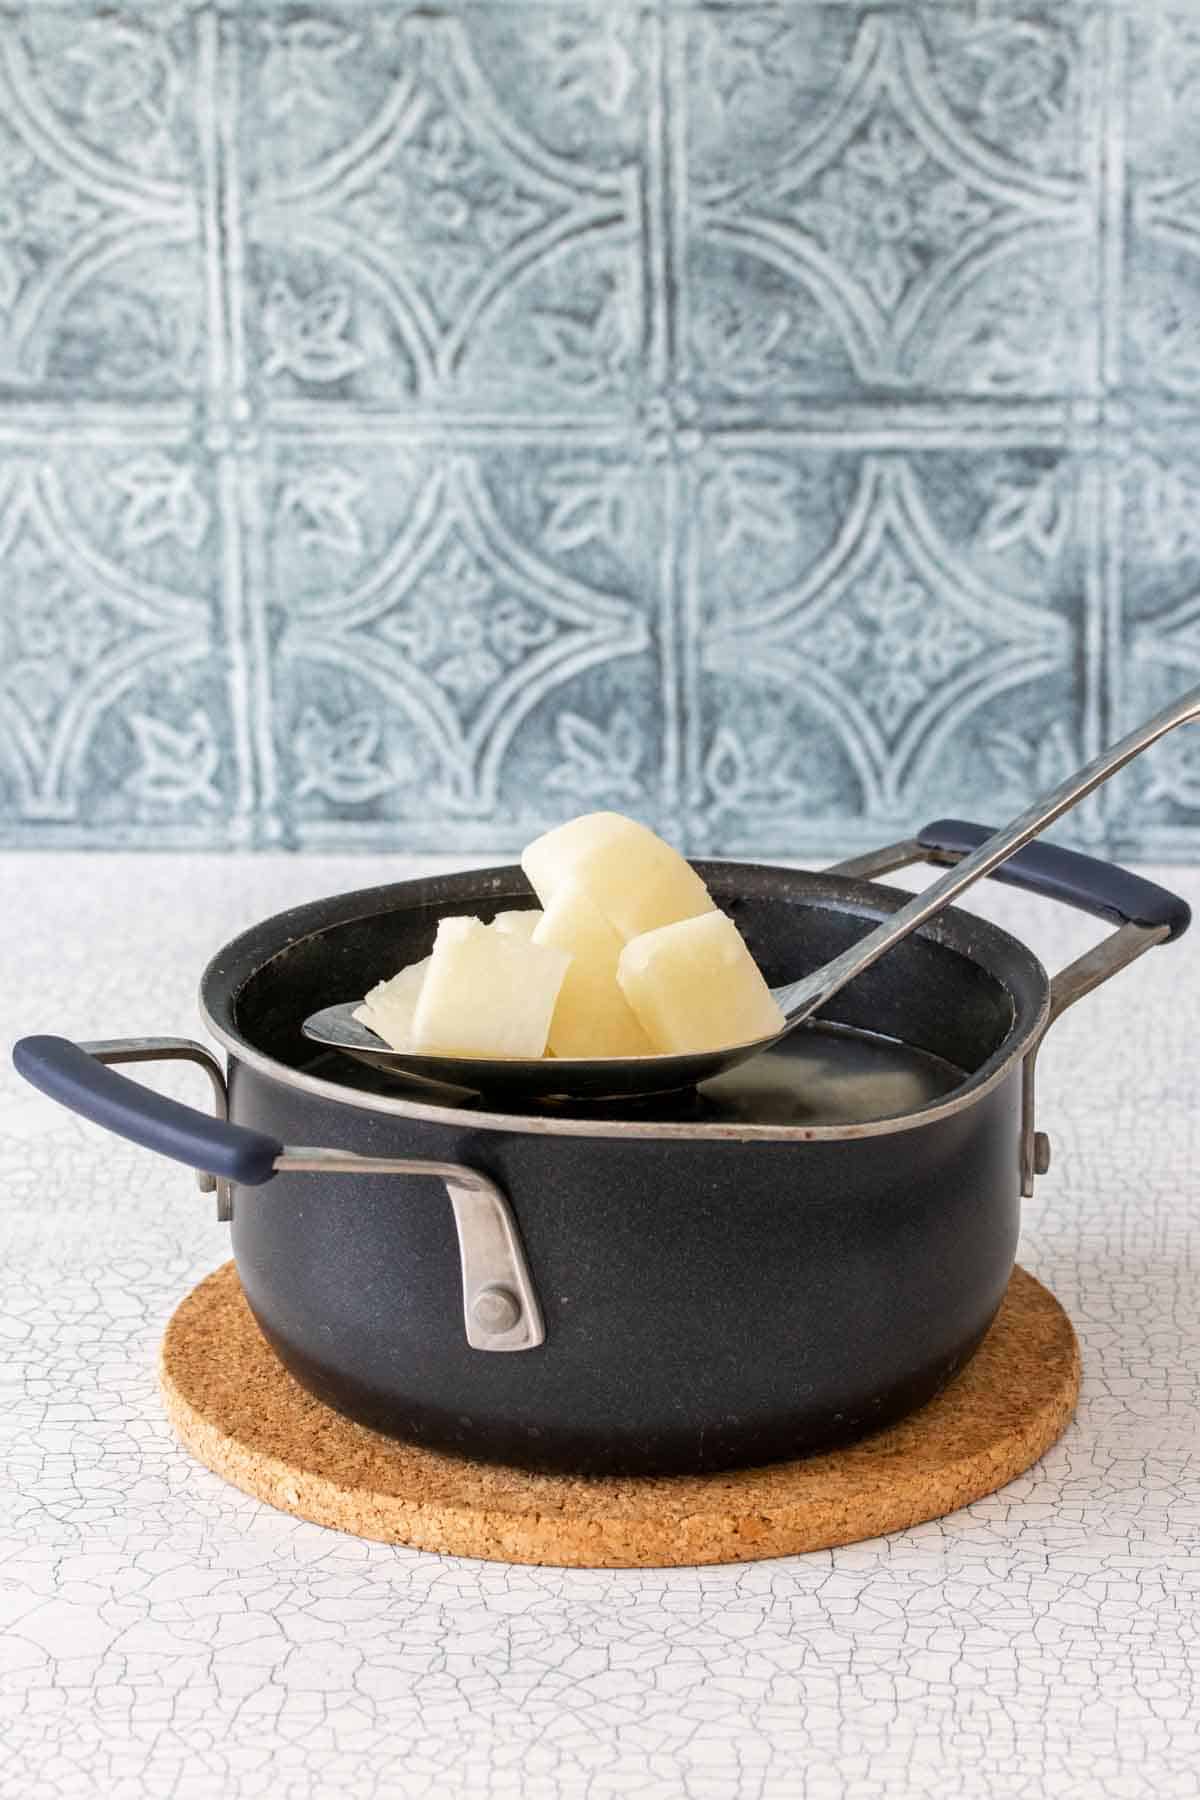 A slotted spoon with potato pieces coming out of a black pot with handles sitting on a cork trivet